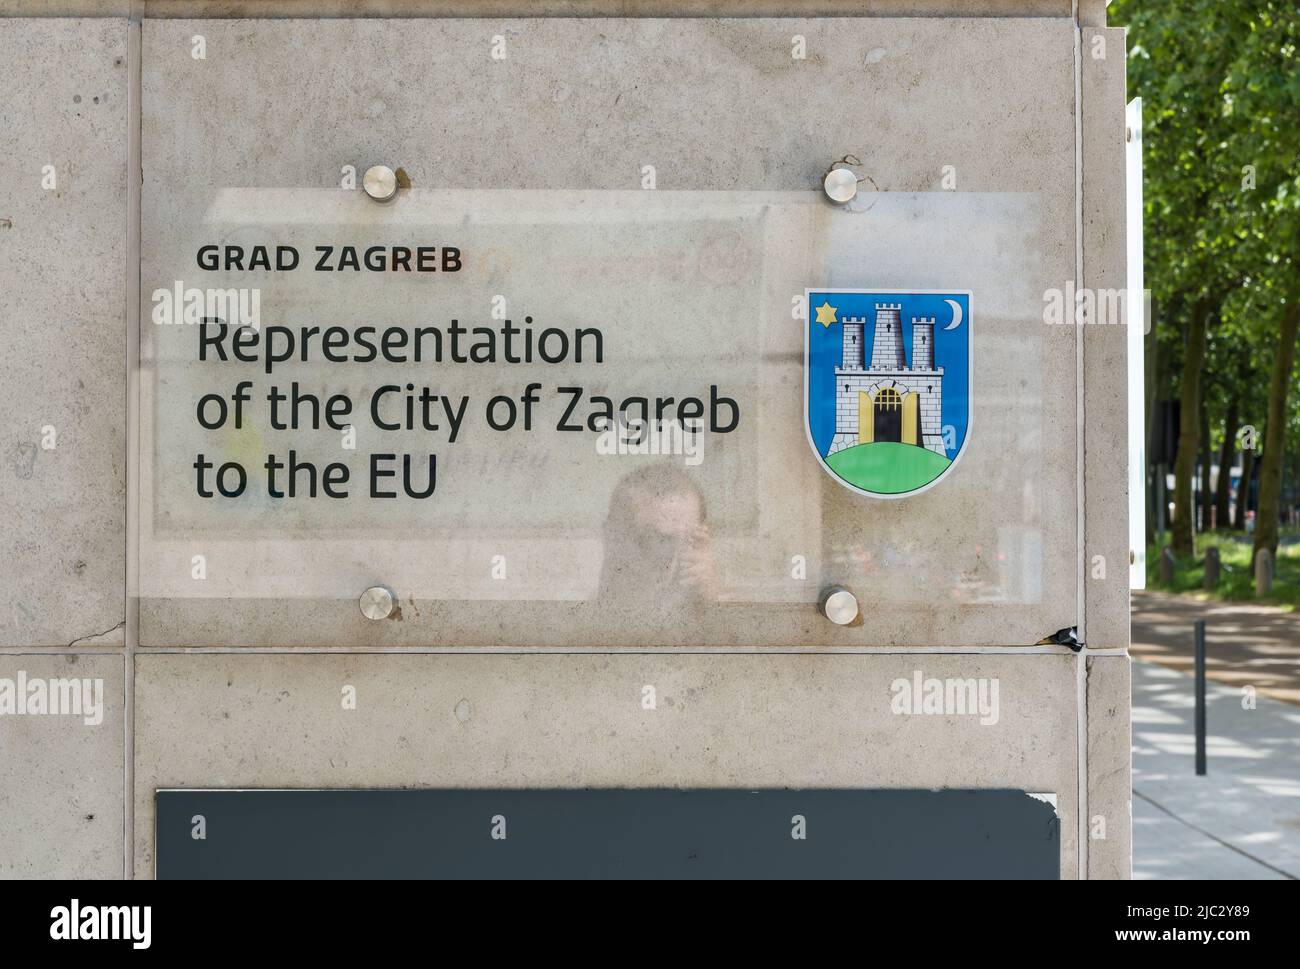 Saint - Josse, Brussels Capital Region - Belgium - 05 20 2020 Sign on the facade of the representation of the city of Zagreb to the EU Stock Photo